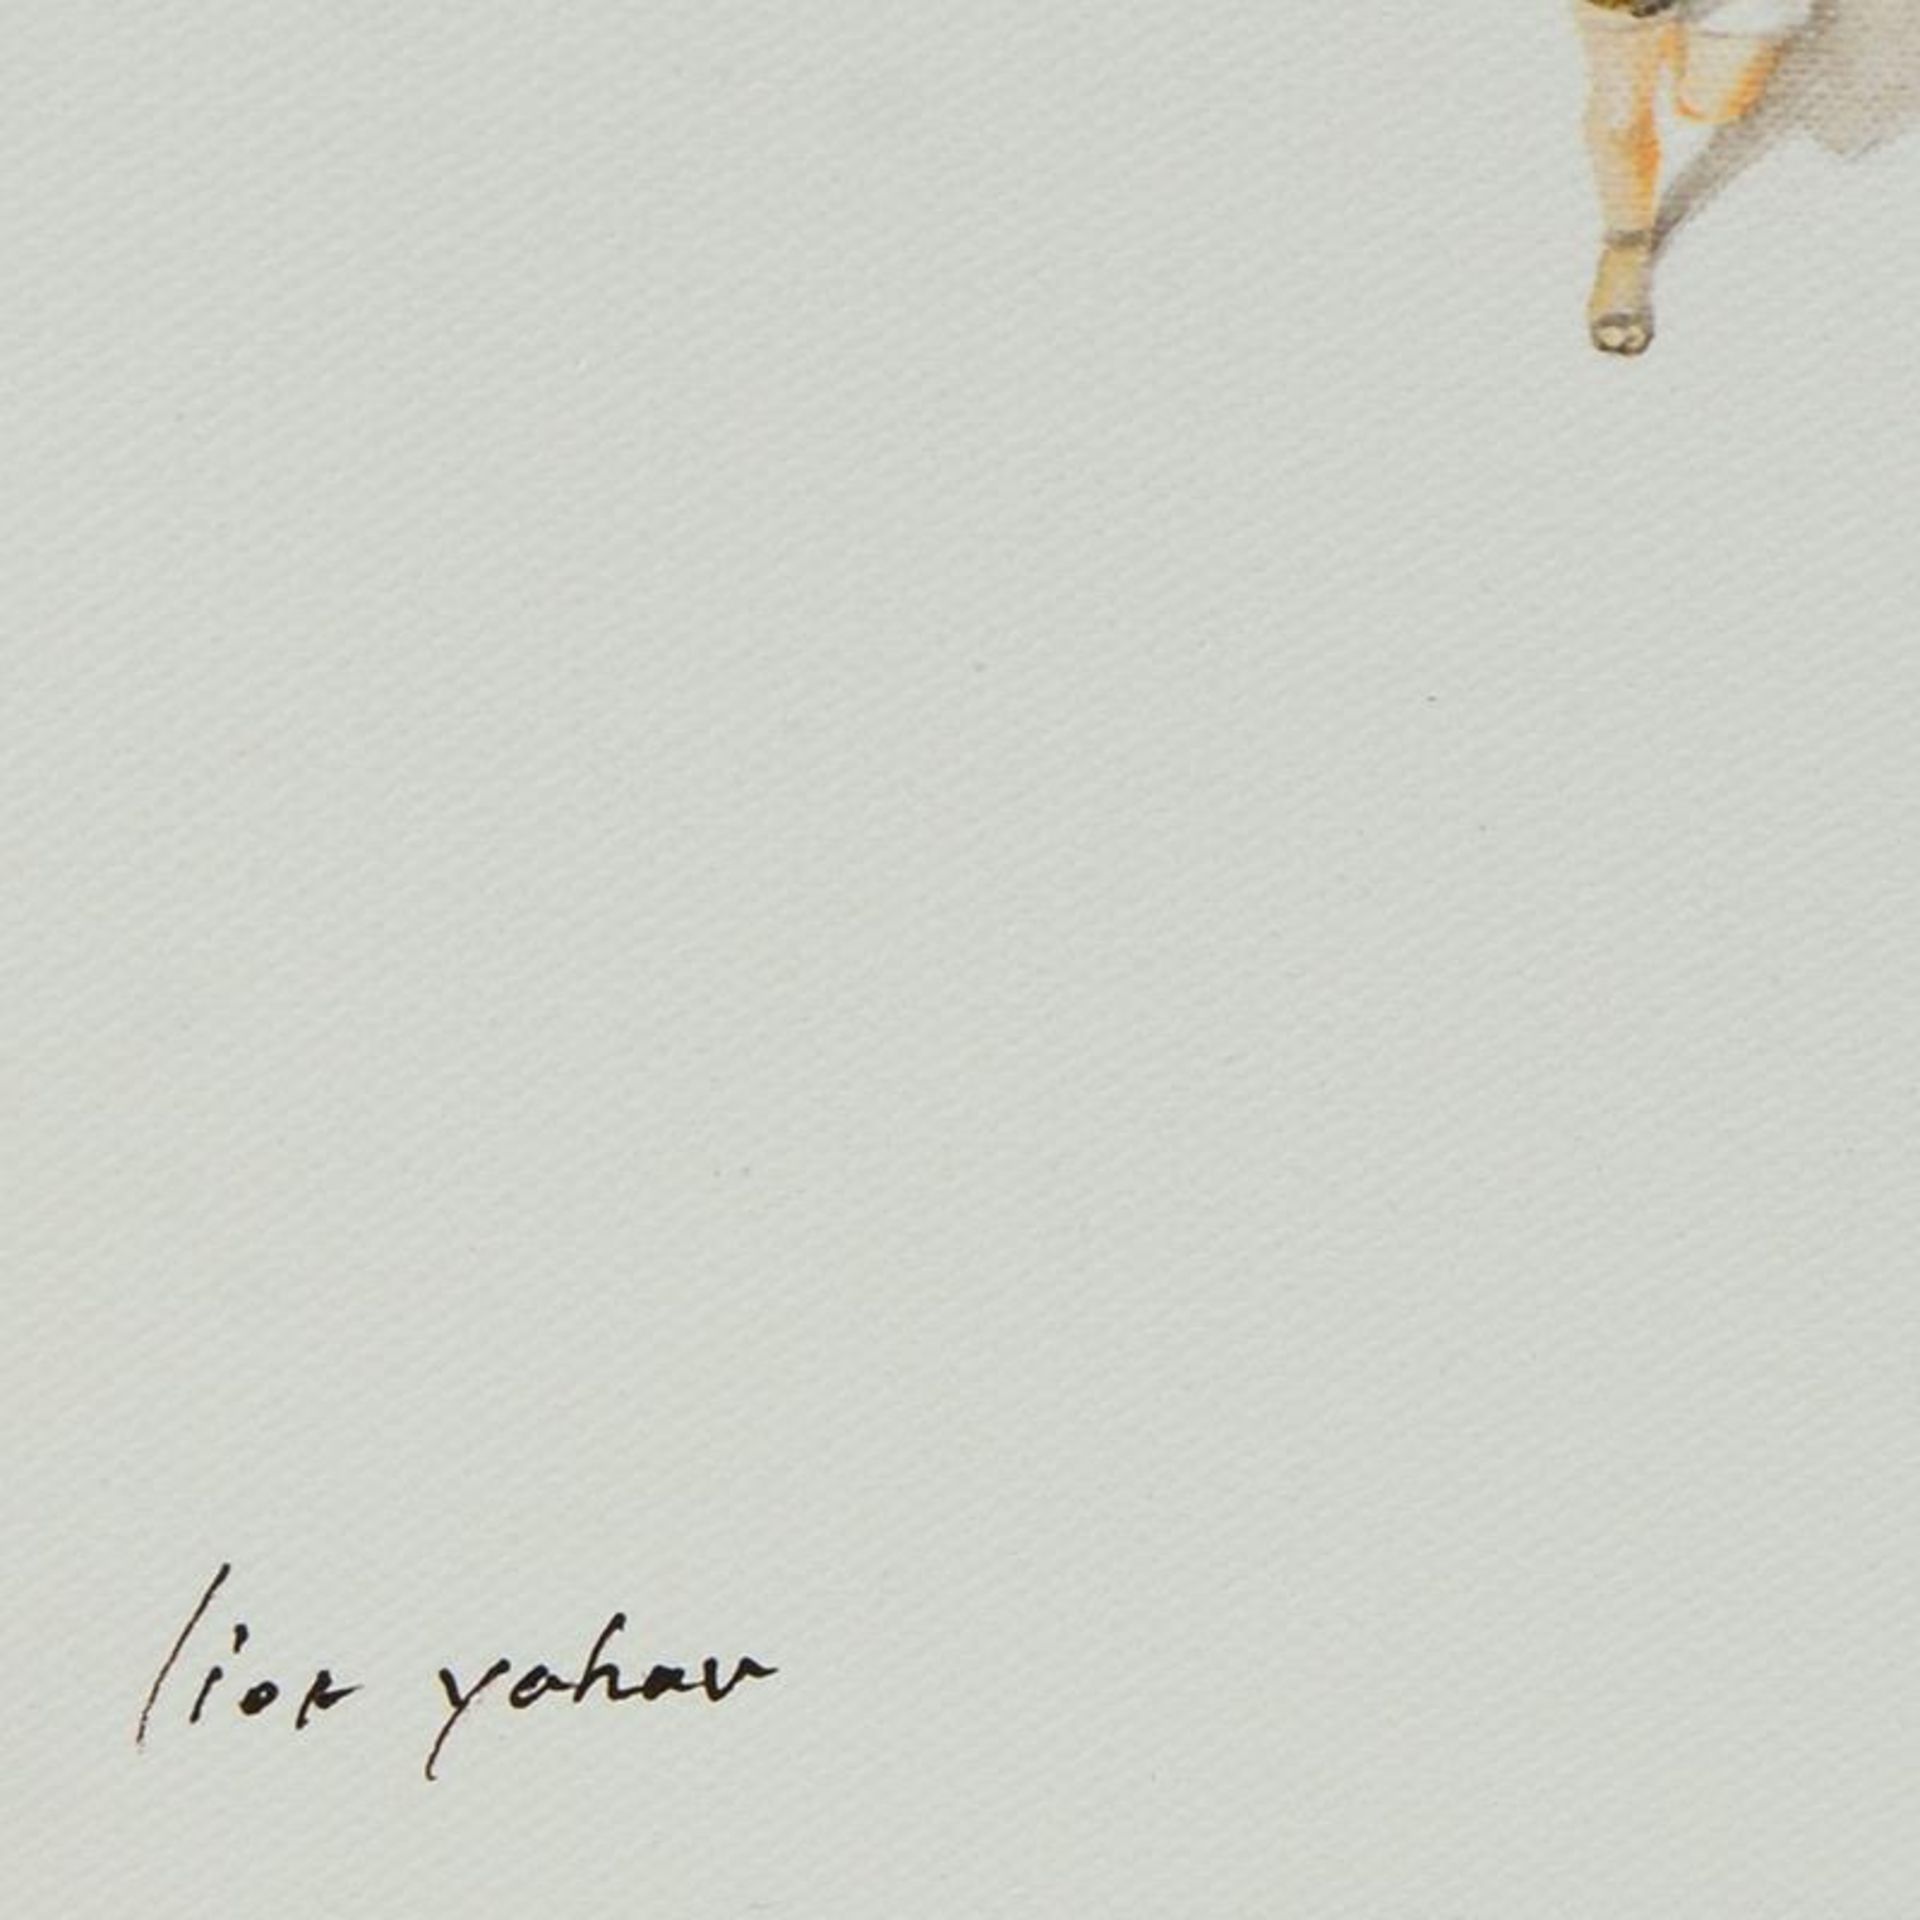 Lior Yahav, Limited Edition on Canvas, Numbered Inverso and Hand Signed with Let - Image 2 of 2